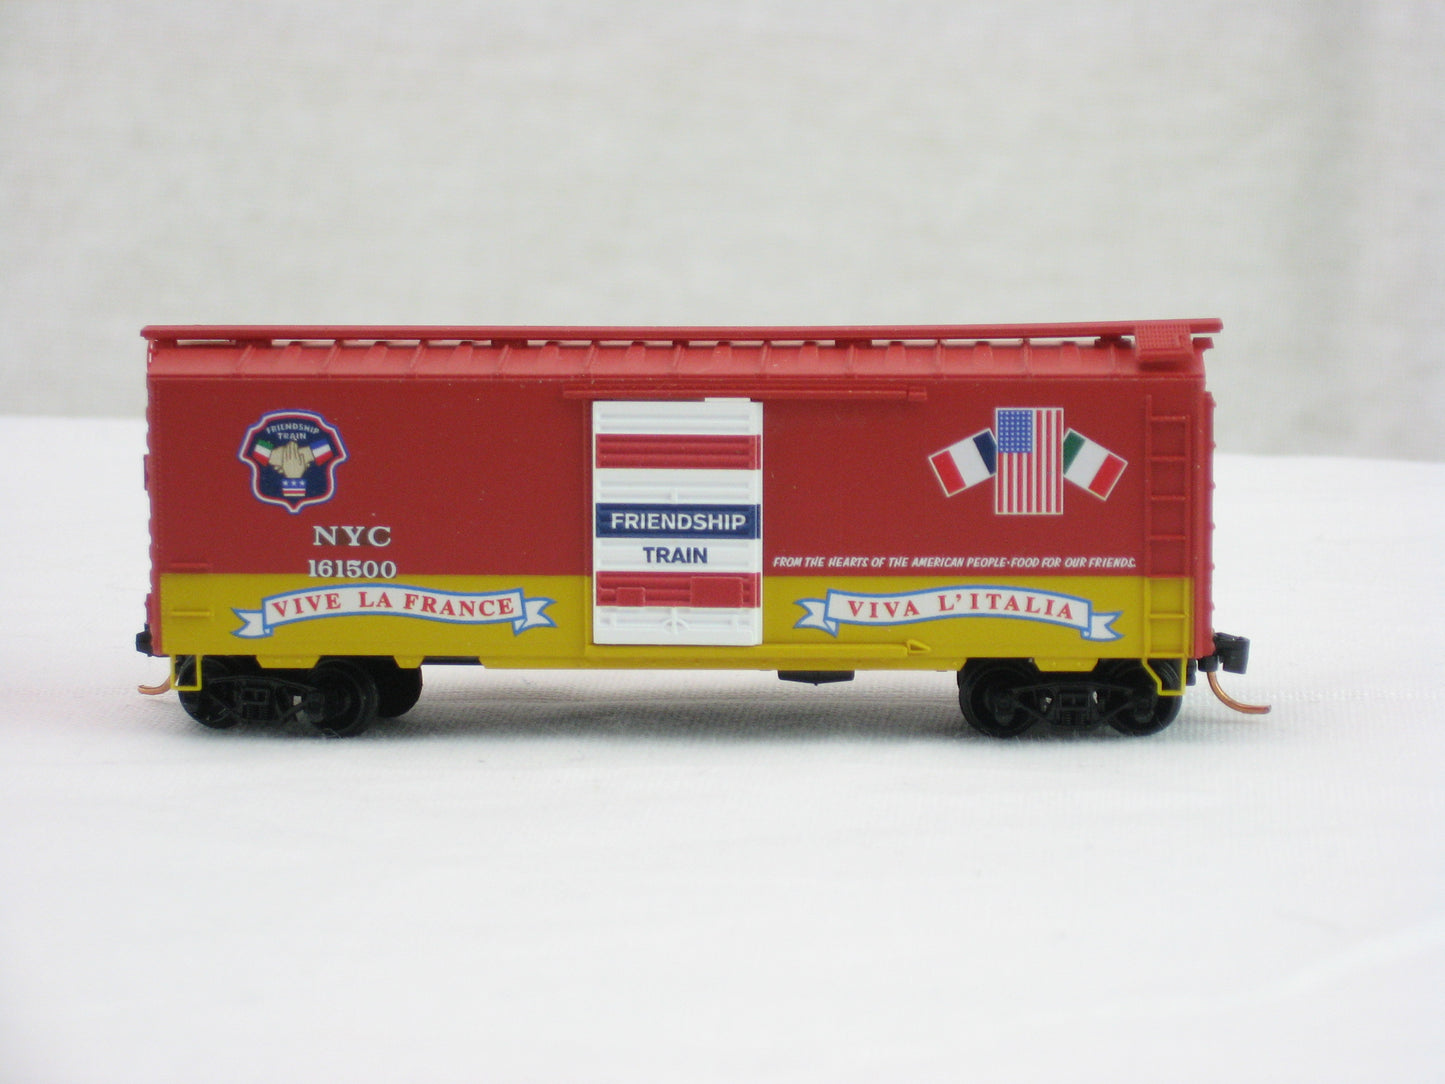 MTL-020 00 007 - NYC 40' Boxcar - Road #161500 - N Scale